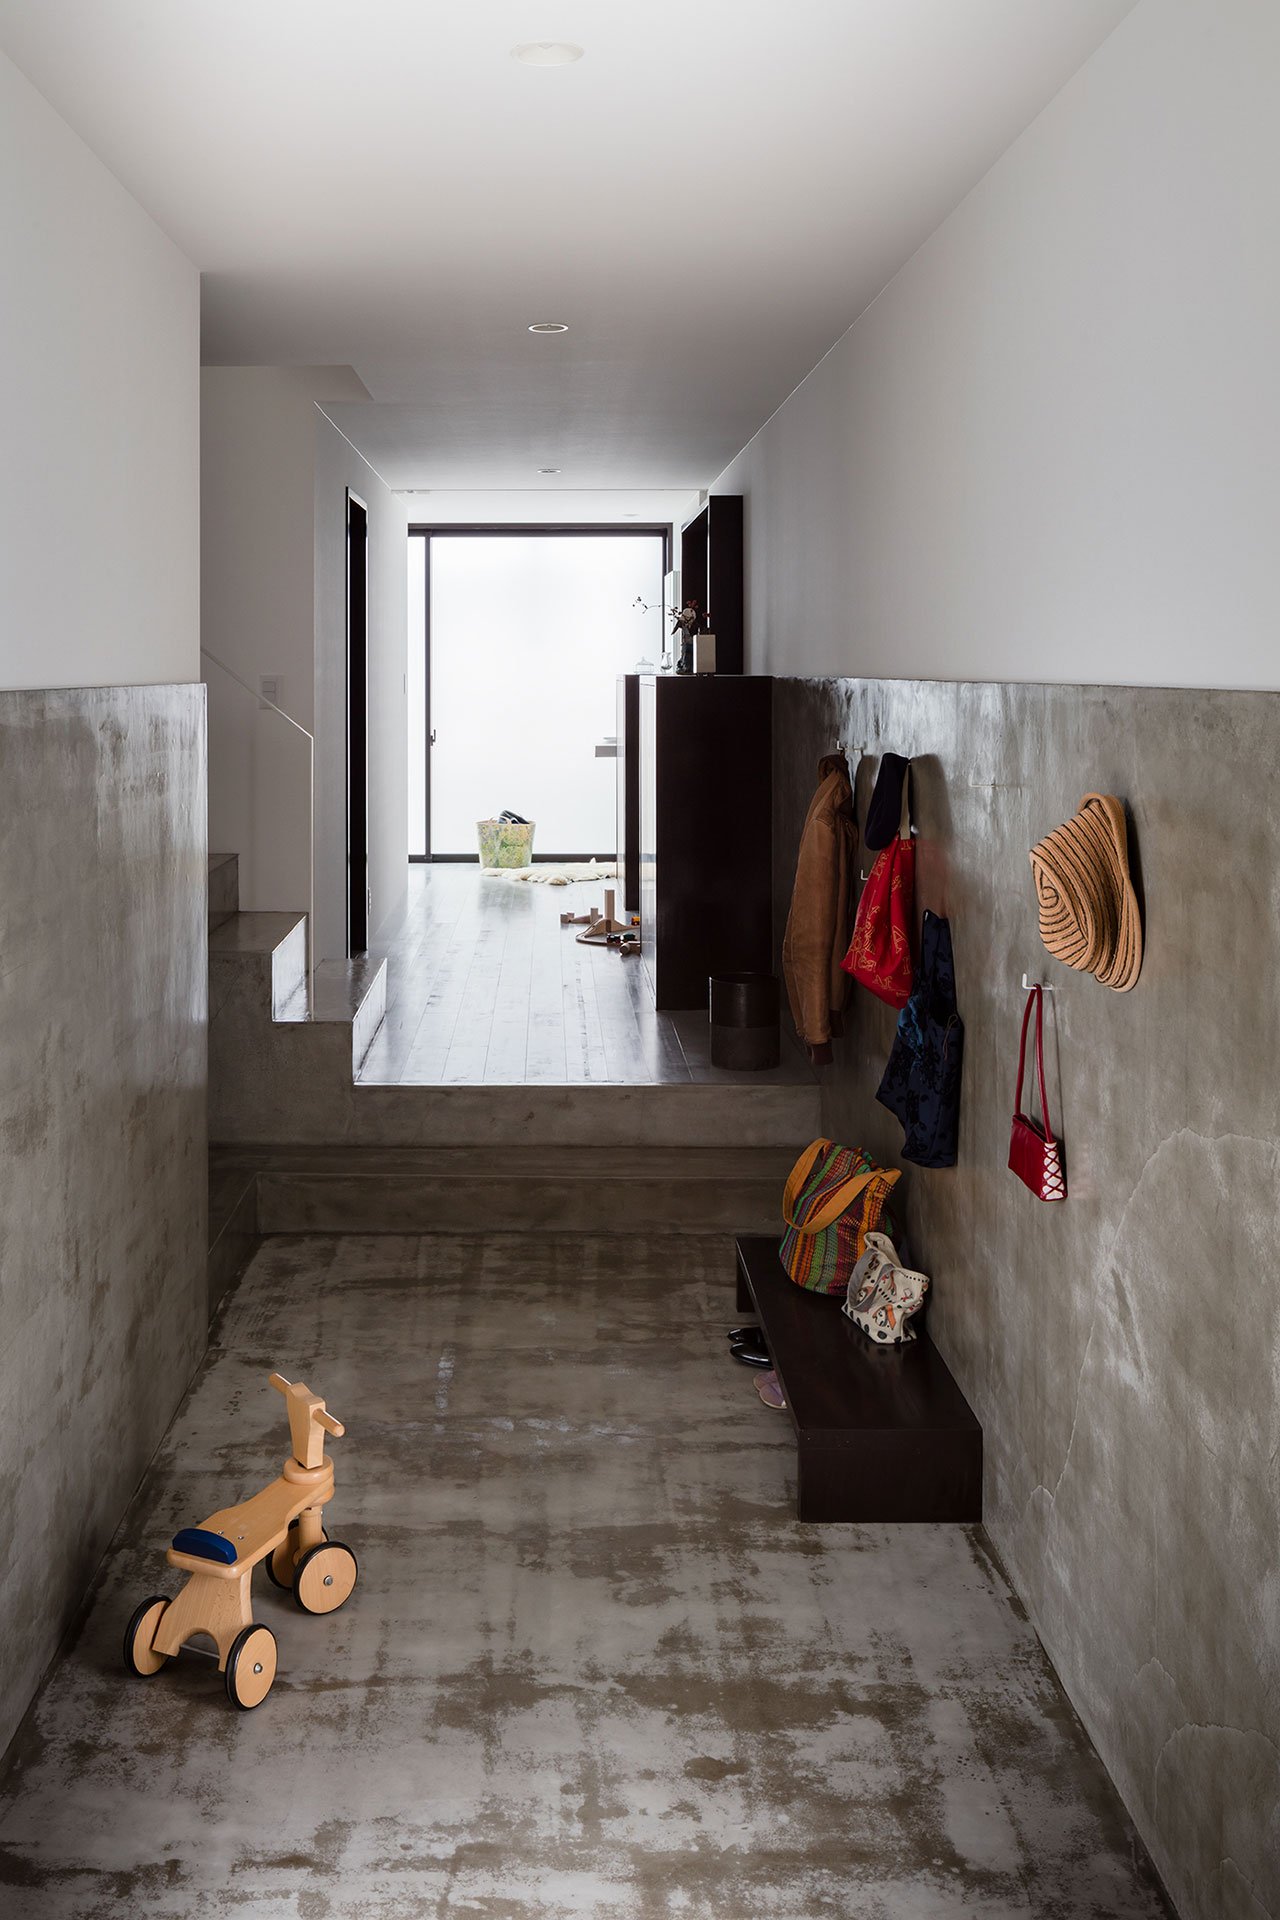 The entryway is done with concrete, a wooden bench and some hooks on the walls